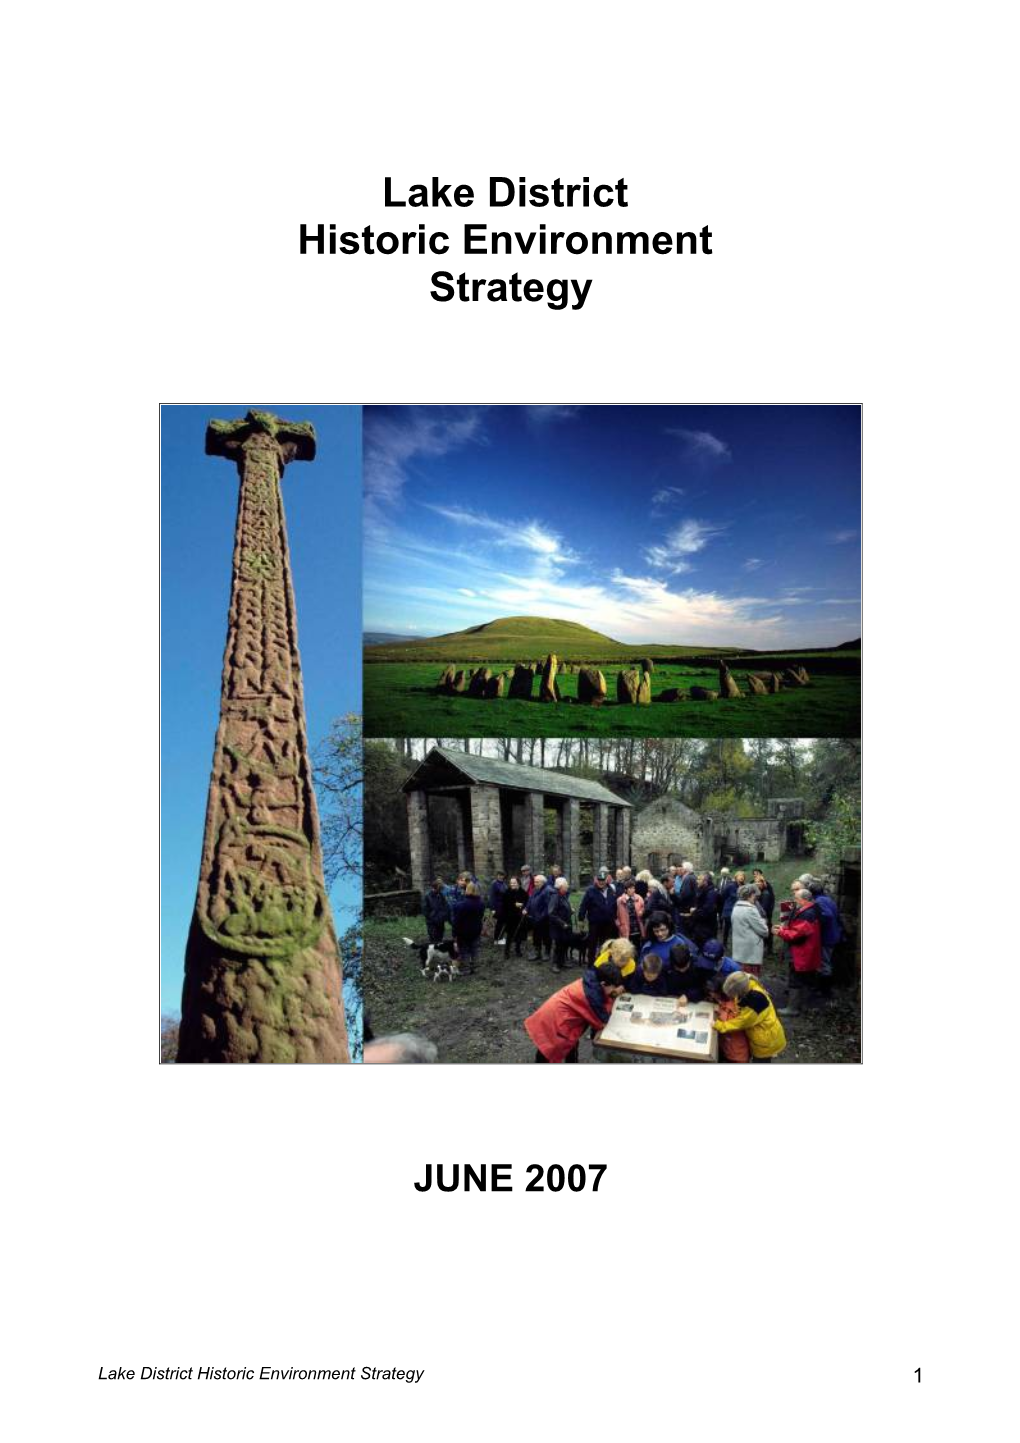 Lake District Historic Environment Strategy Draft Outline